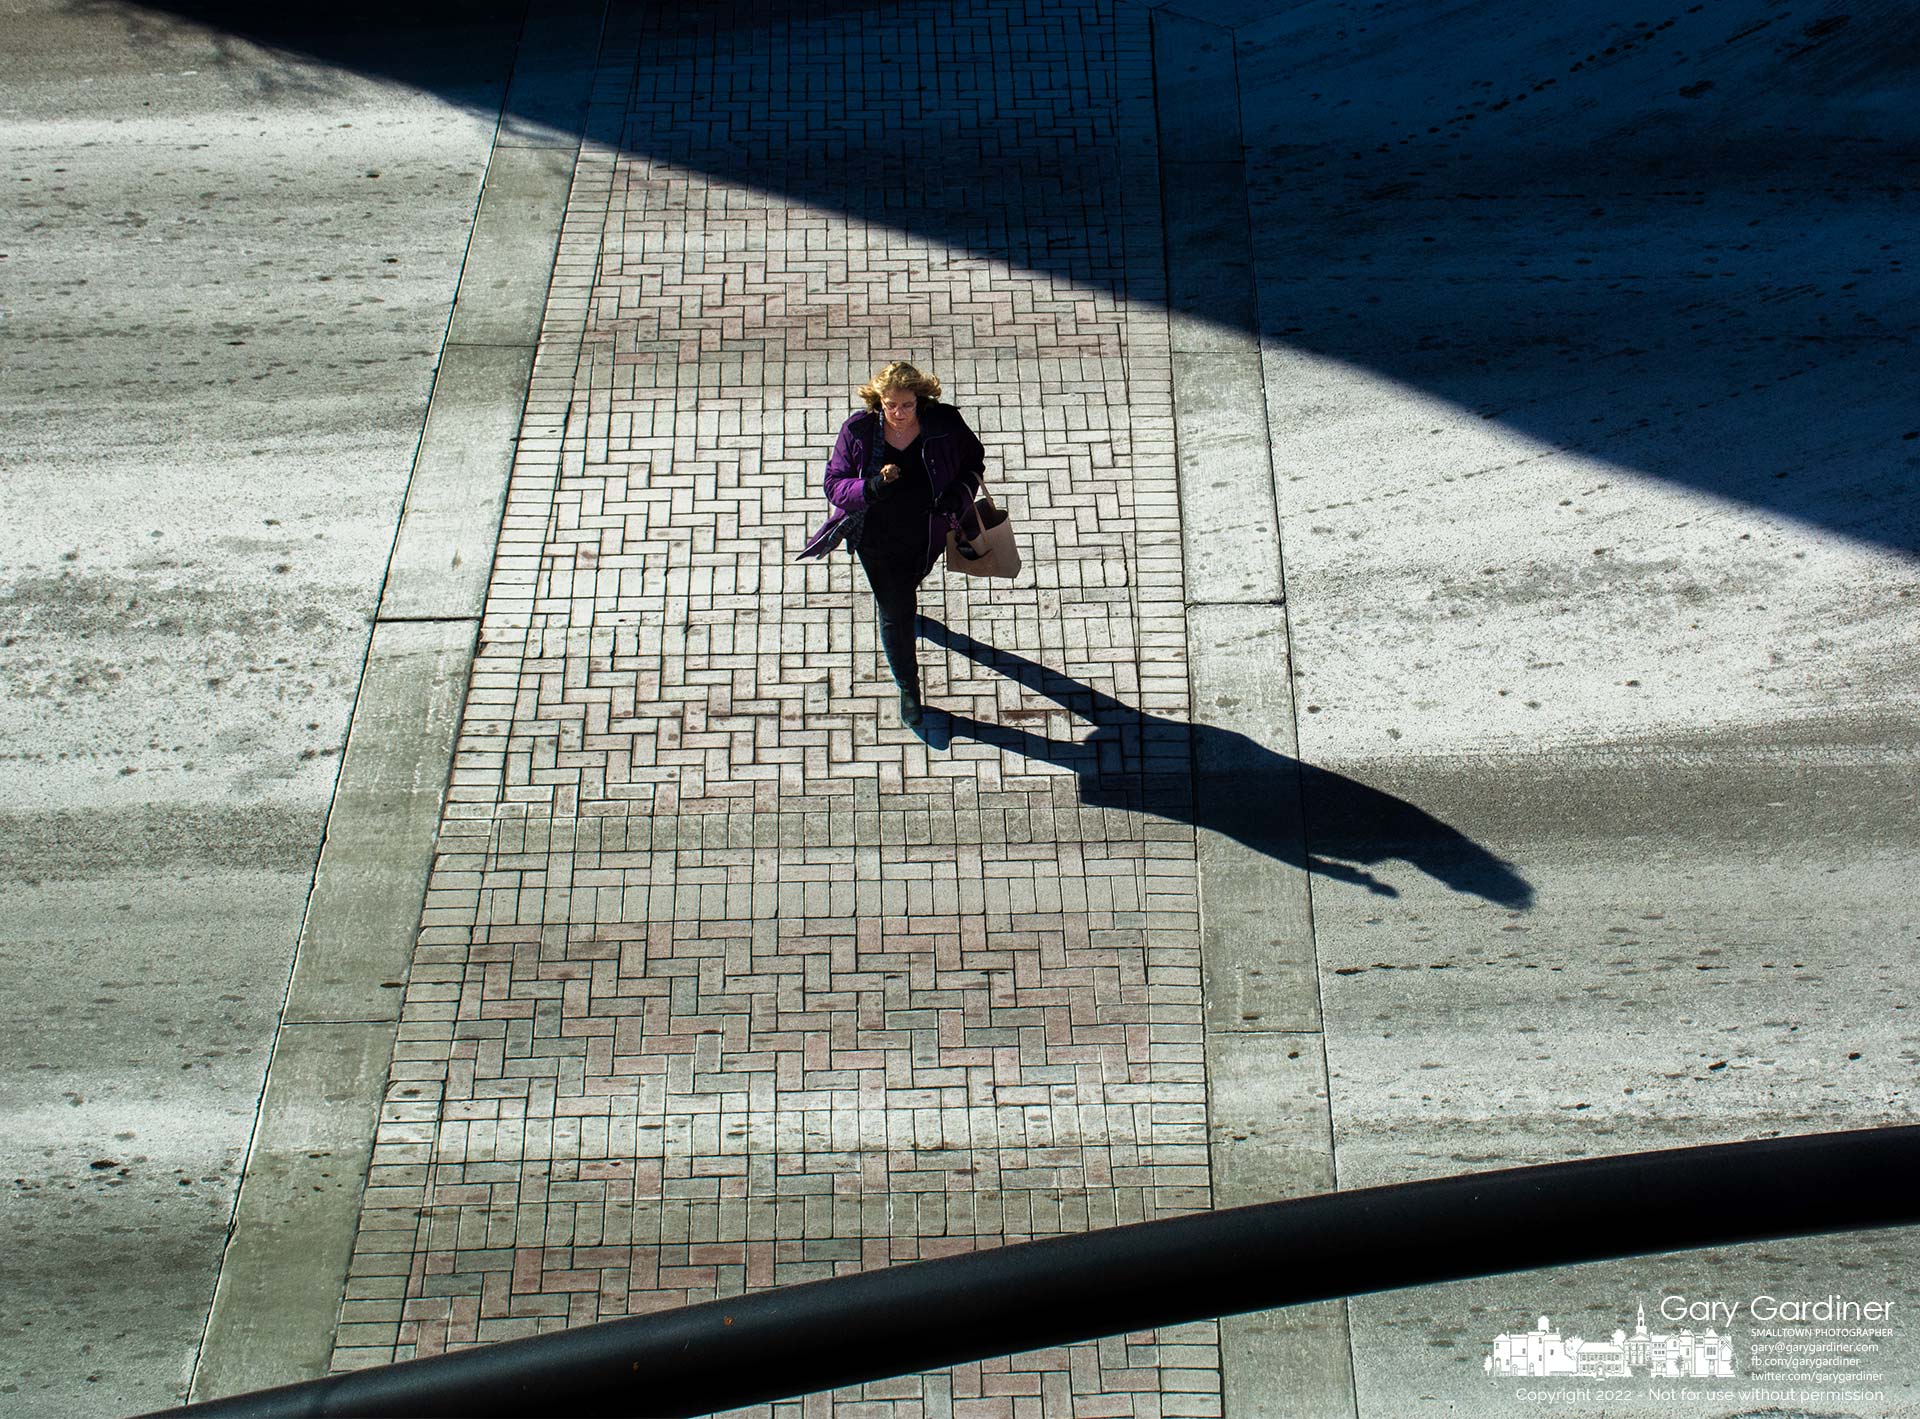 A woman crosses State Street where the red-brick walkway wears a dusty coating of brine sprayed by the city to help melt any snow and ice that maybe happen at the intersection with Main Street. My Final Photo for Jan/. 21, 2022.